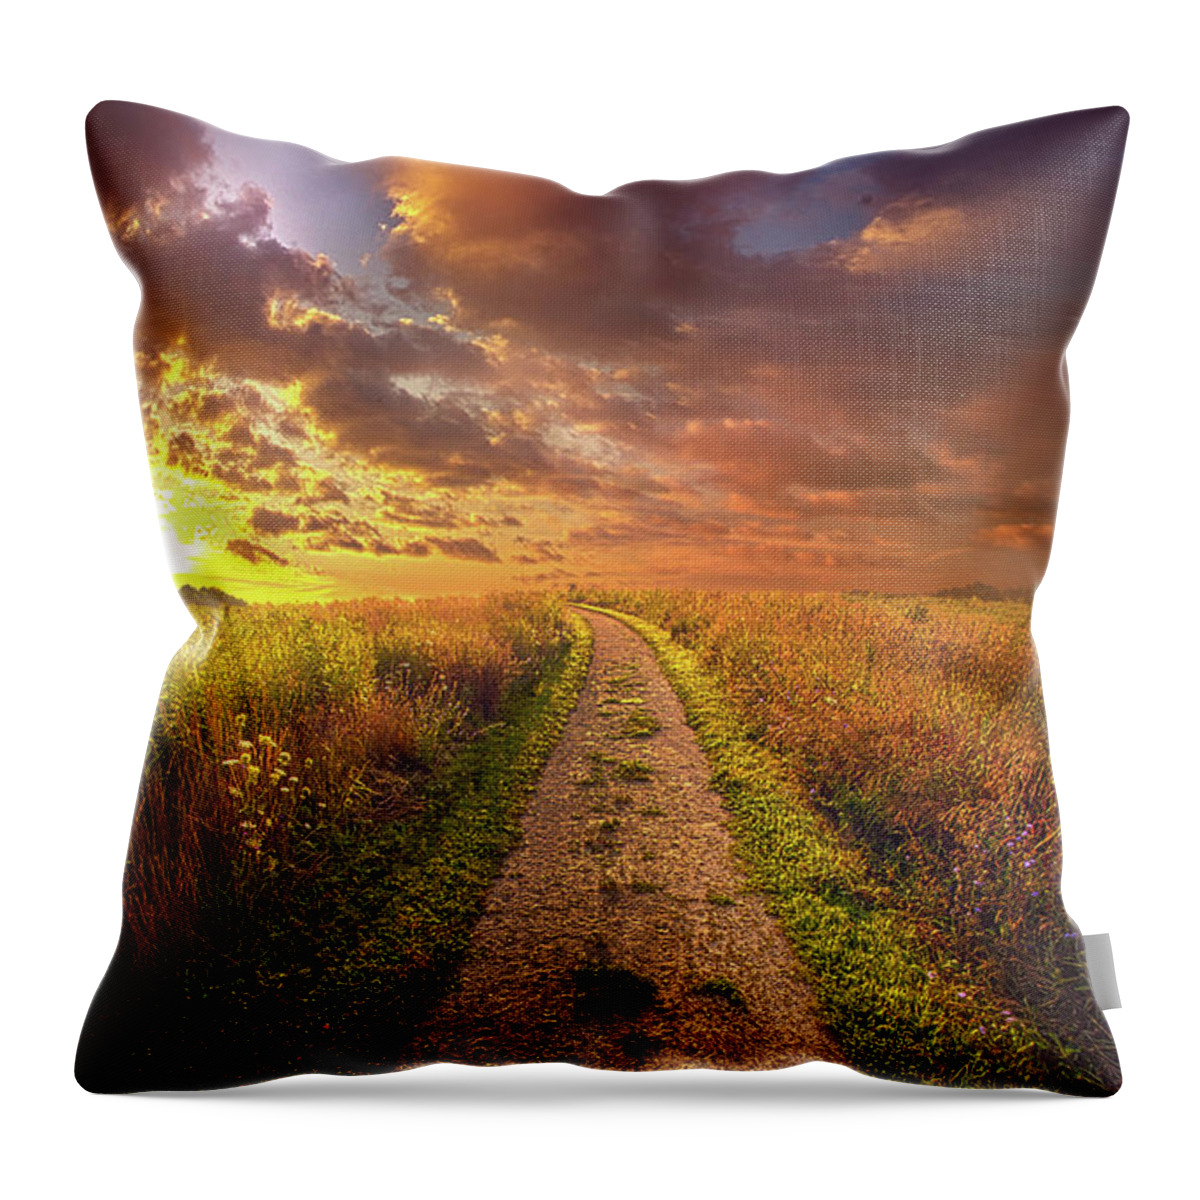 Life Throw Pillow featuring the photograph Oh Brother Where Art Thou by Phil Koch